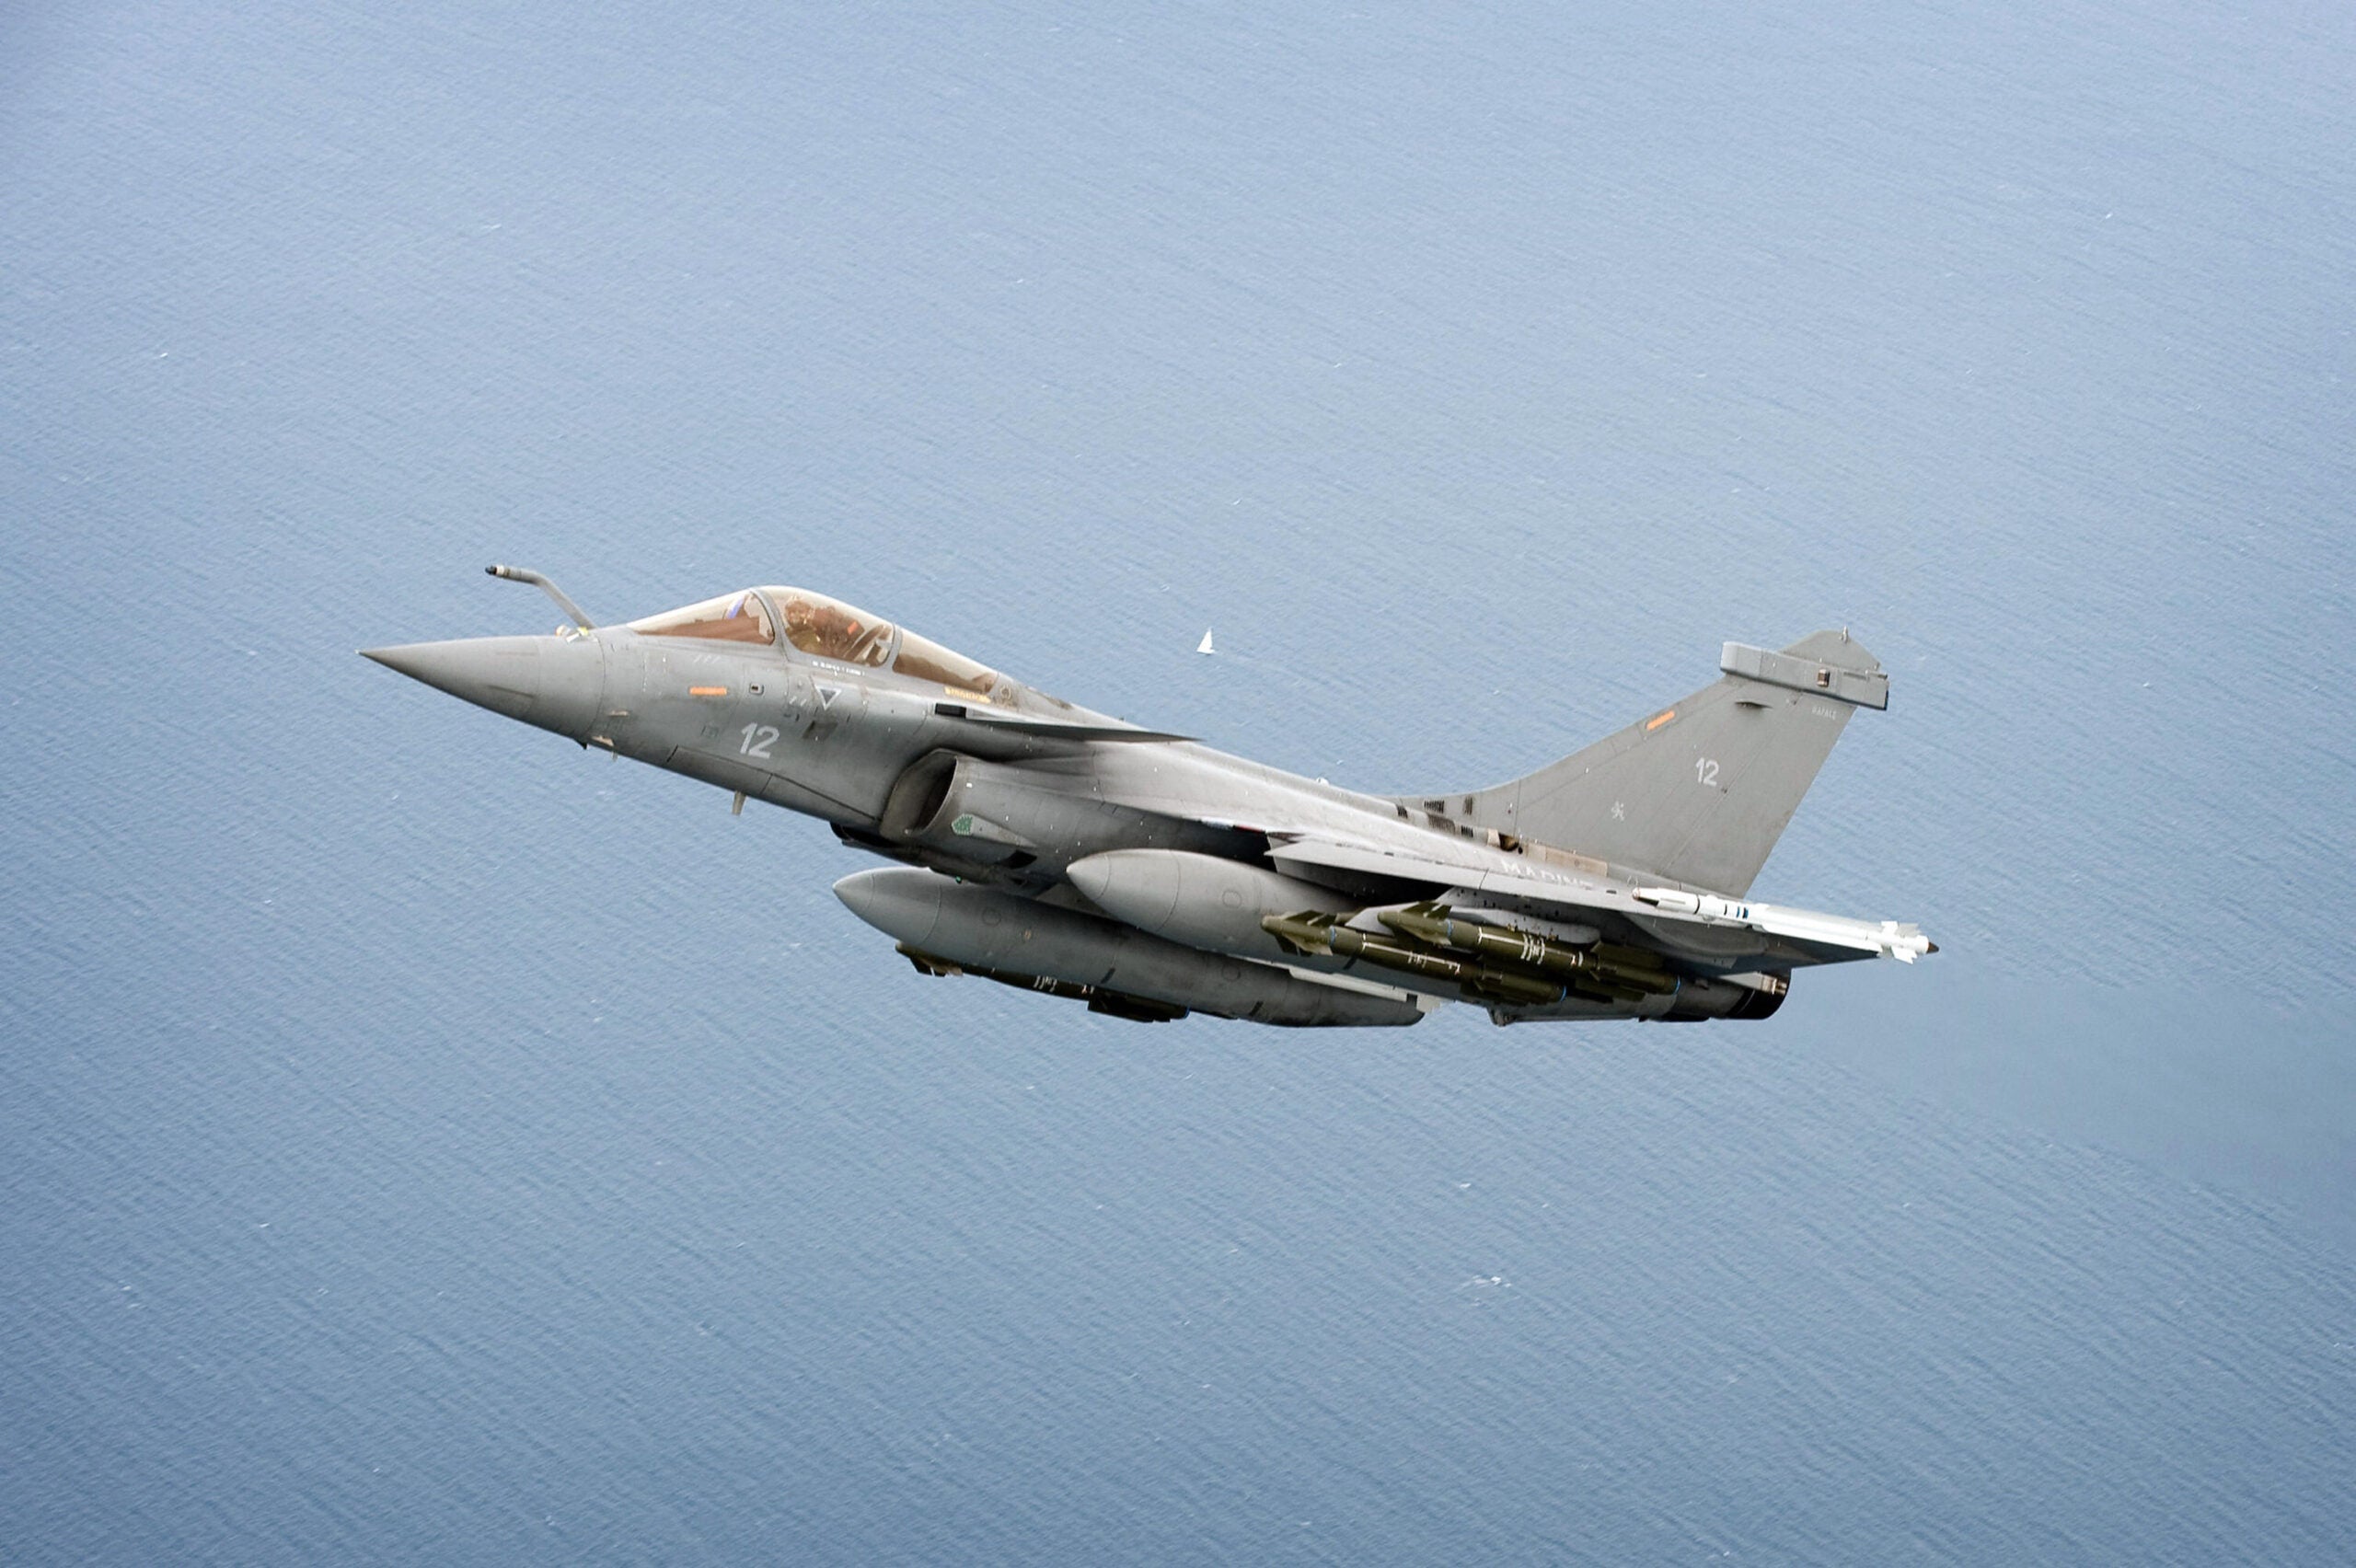 This undated picture released by Marine Nationale (French Navy) on September 24, 2009 shows a Rafale jet fighter flying over the sea. Two French Rafale jet fighters crashed on September 24, 2009 in the Mediterranean sea off the coast of southern France, and one pilot was recovered. The accident occurred about 30 kilometres (20 miles) east of the coastal city of Perpignan during a test flight in which the two aircraft were taking part.   AFP PHOTO / MARINE NATIONALE / MAEL PRIGENT (Photo credit should read MAEL PRIGENT/AFP via Getty Images)